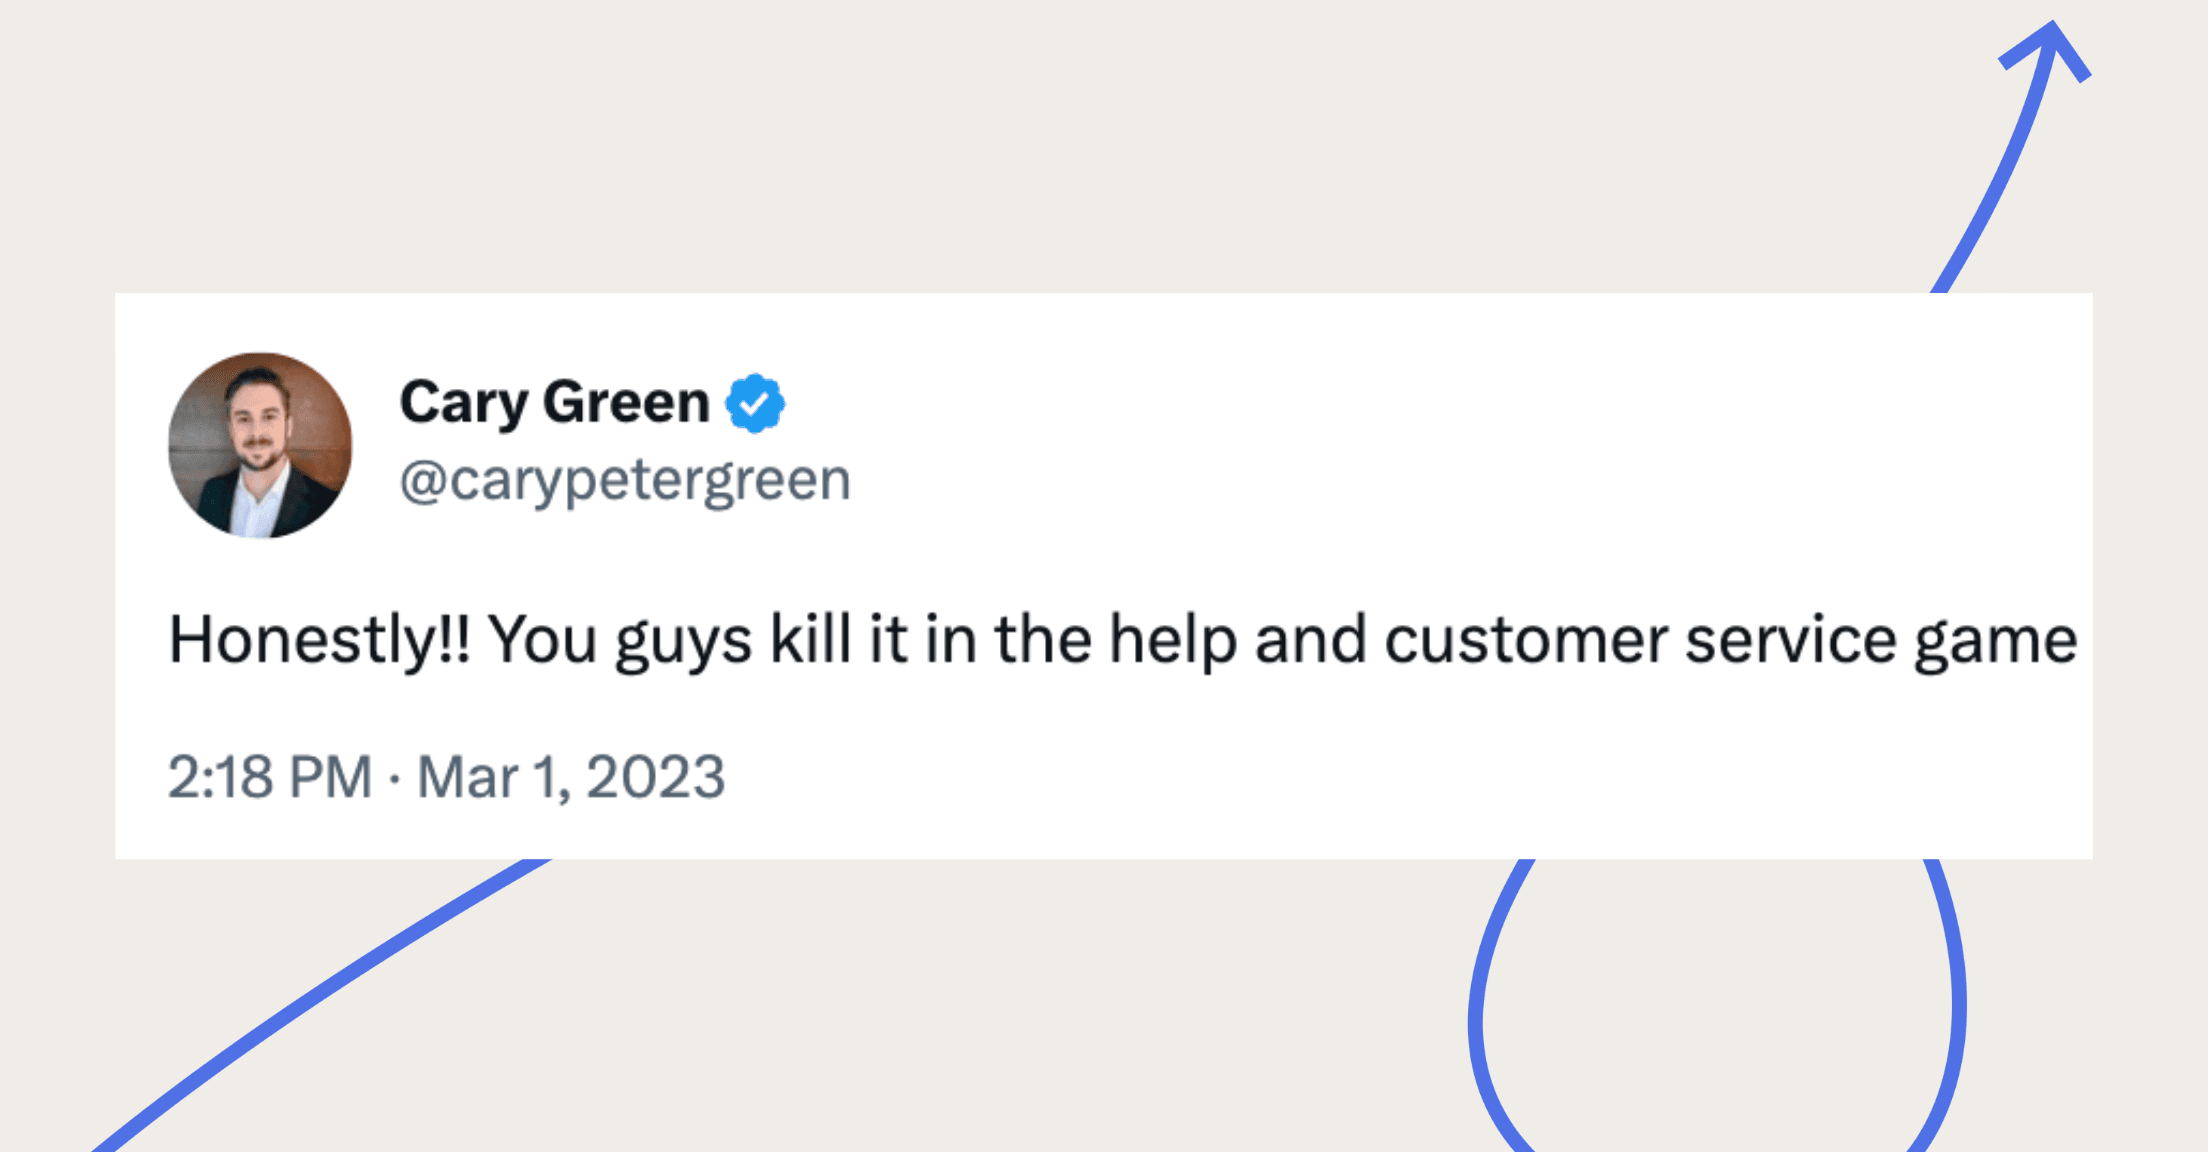 Tweet from Cary Green of Green Era Financial, "Honestly!! You guys kill it in the help and customer service game"